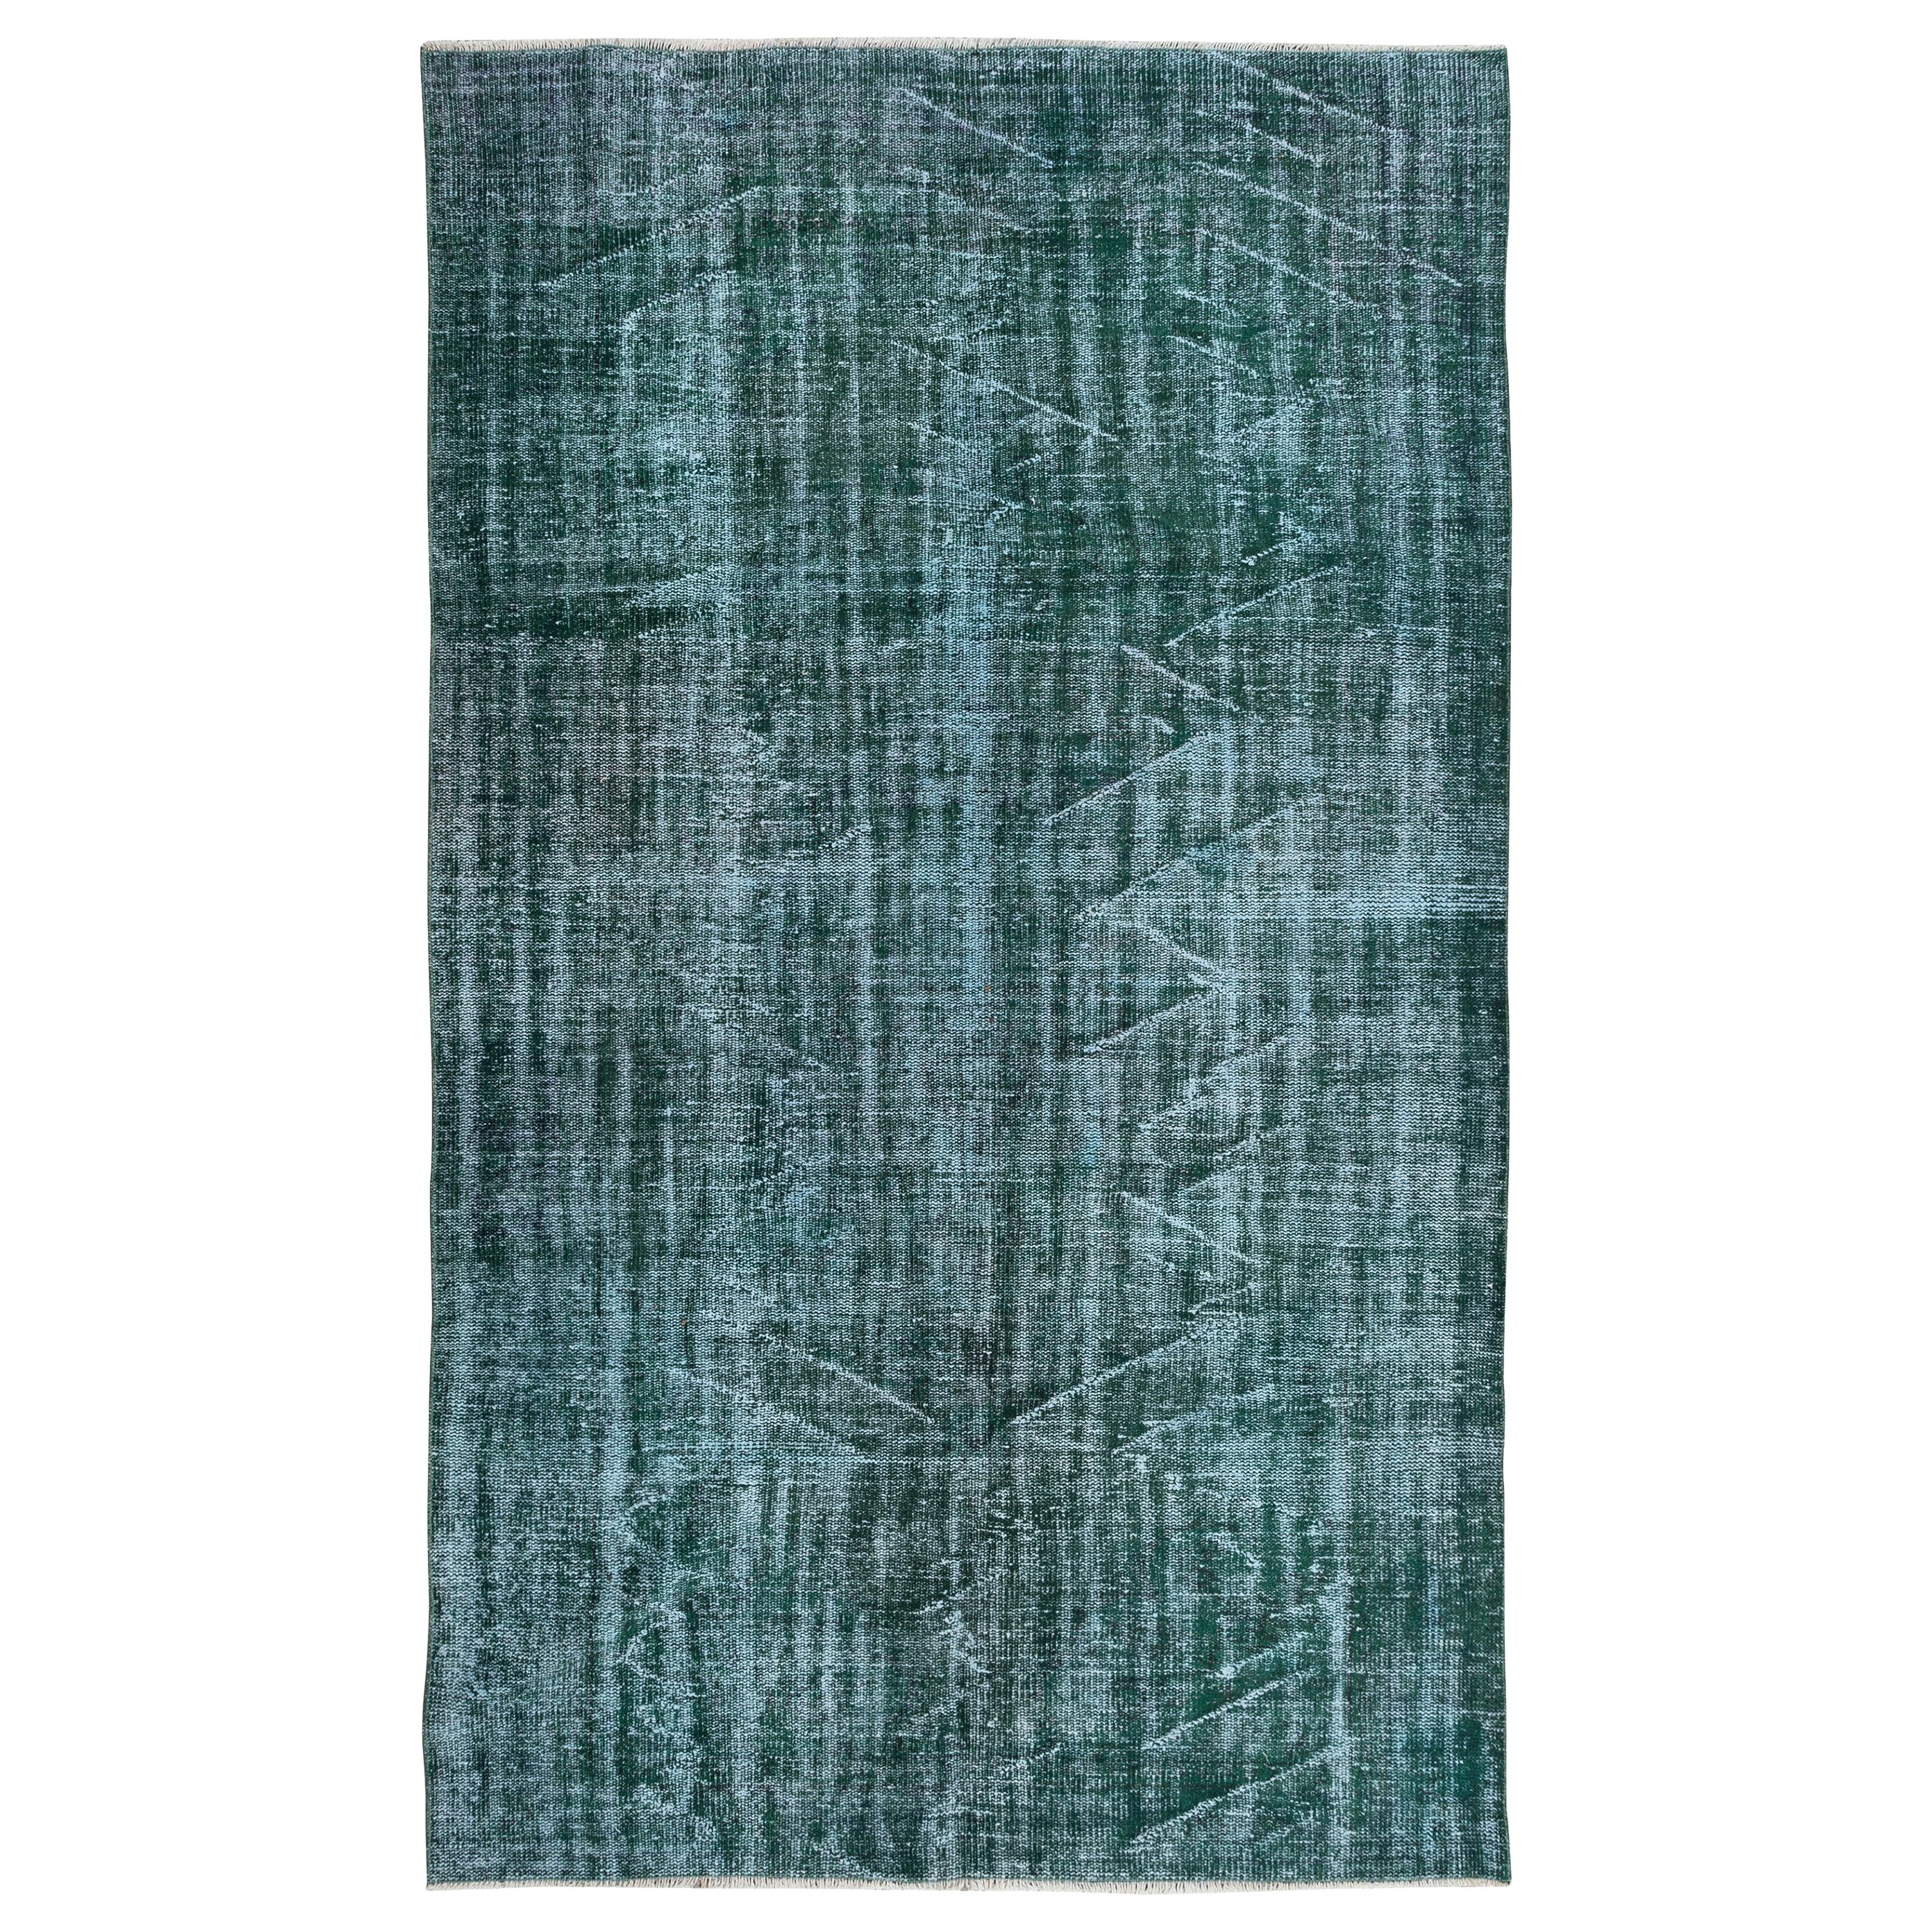 5.2x8.6 Ft Modern Handmade Turkish Green Area Rug with Shabby Chic Style For Sale